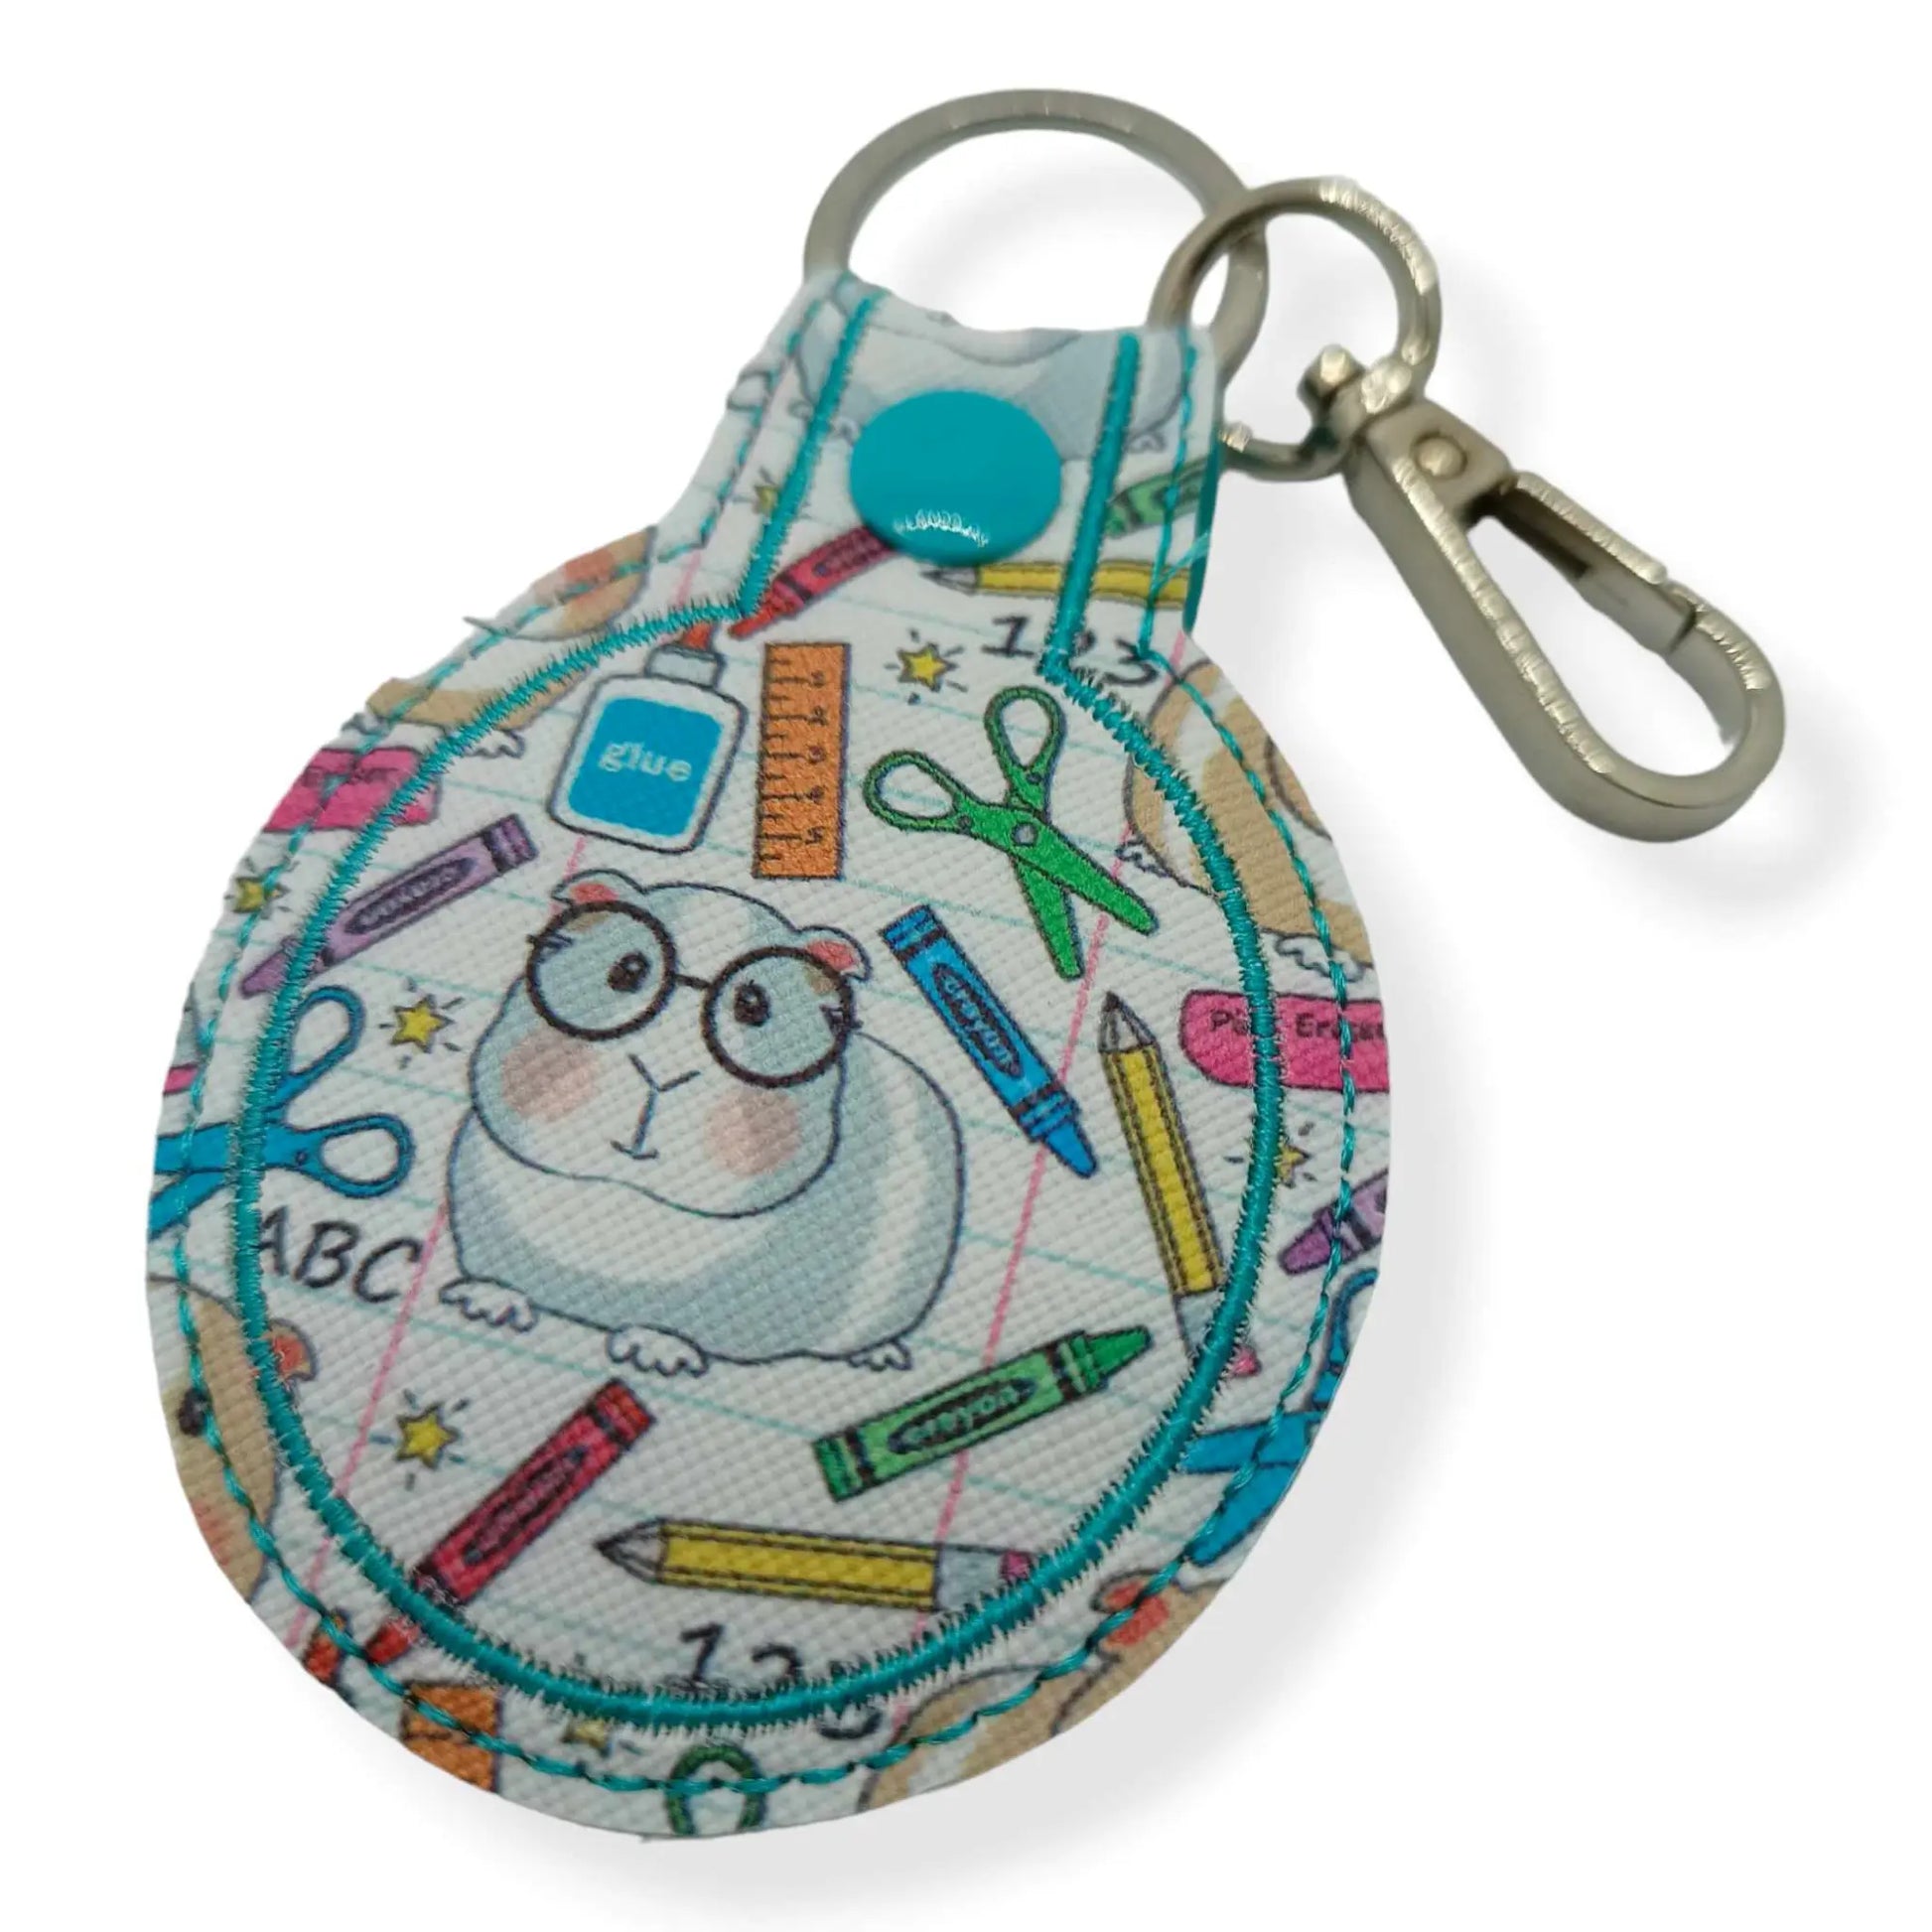 READY MADE - READY TO POST: Adorable Guinea Pig Keychain | Made in Australia - Image #2